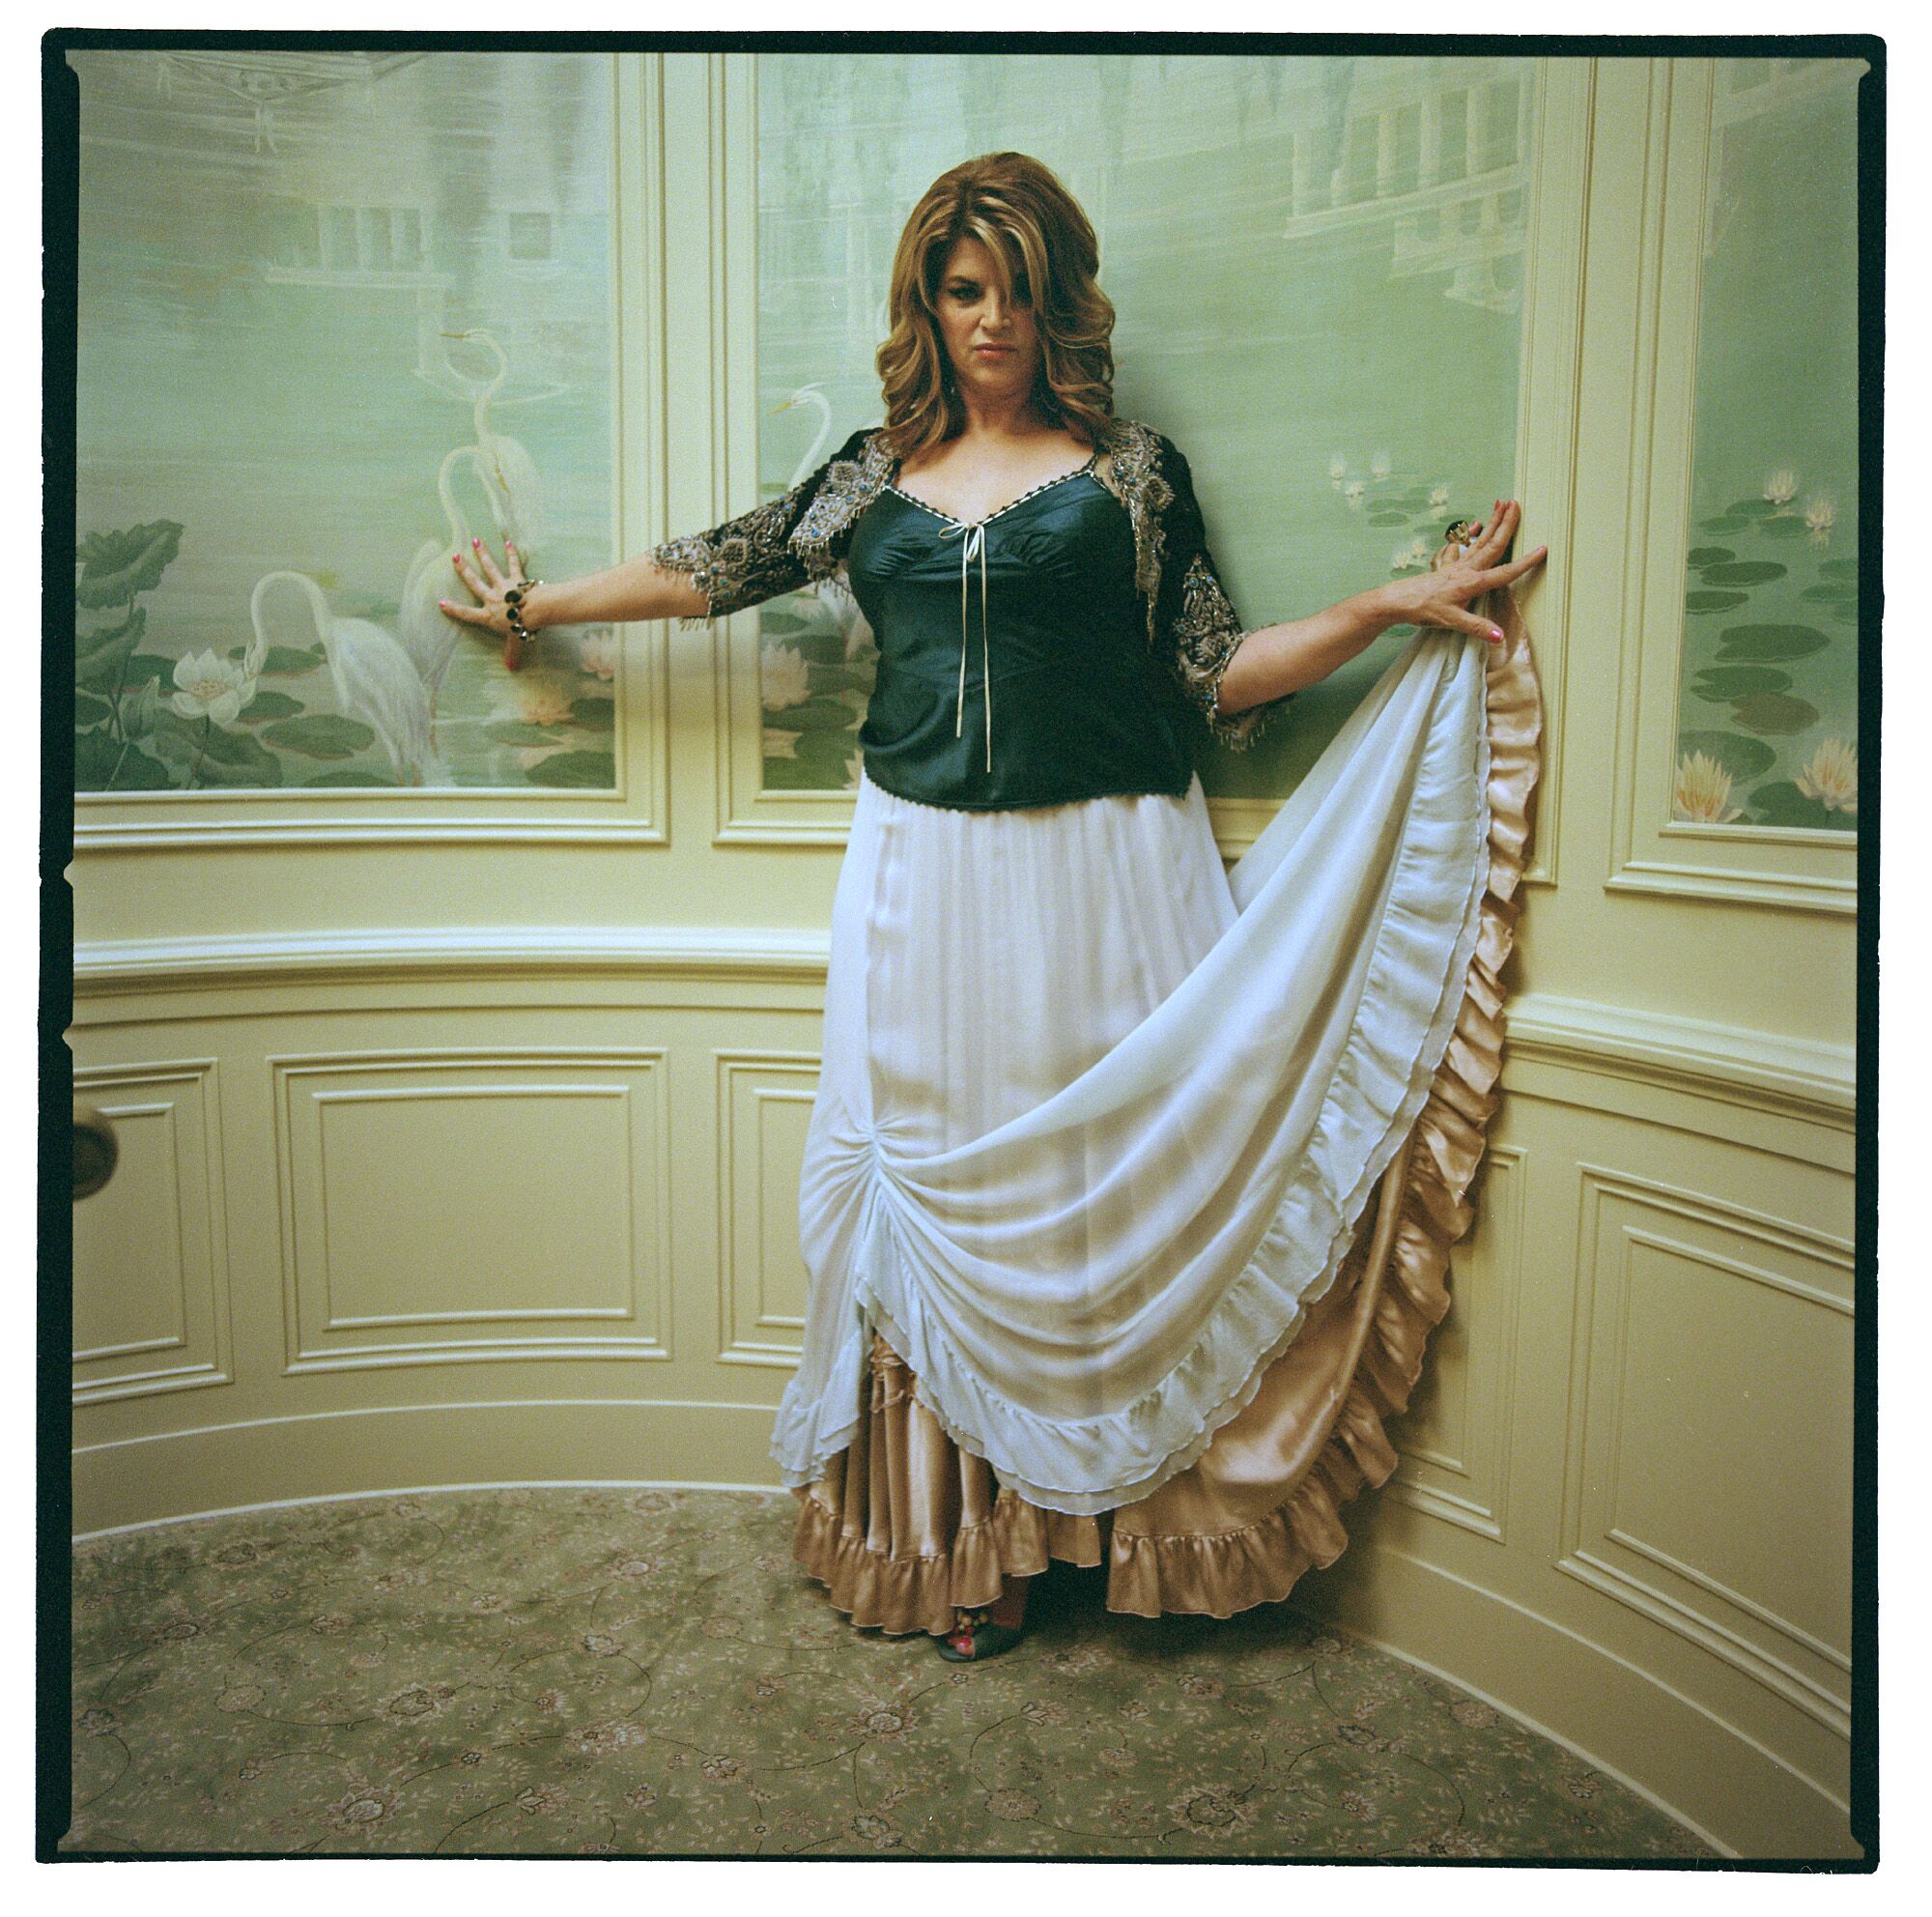 Kirstie Alley poses in a long dress.